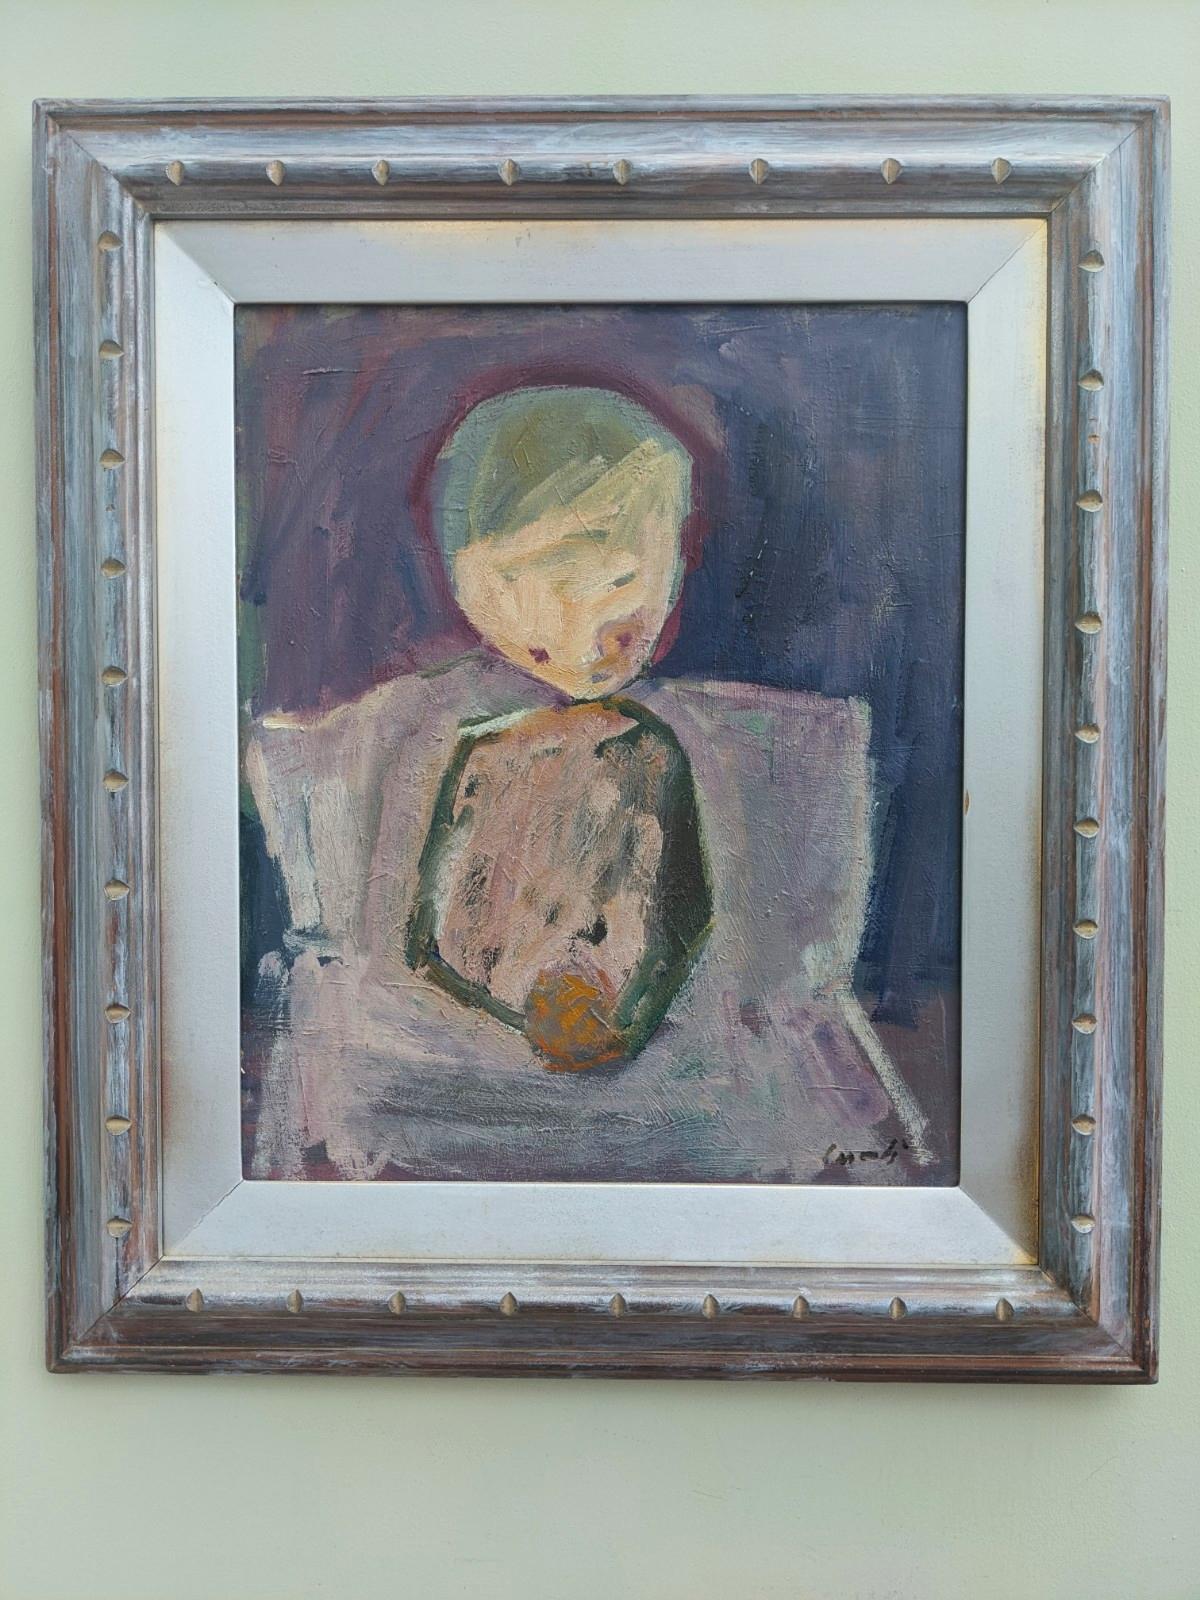 PORTRAIT IN PURPLE
66 x 58 cm (including frame)
Oil on Board 

A semi abstract mid century portrait in oil, painted in 1943.

This unique portrait features an abstracted figure with his hands together, depicted in a painterly style. Loose and broad